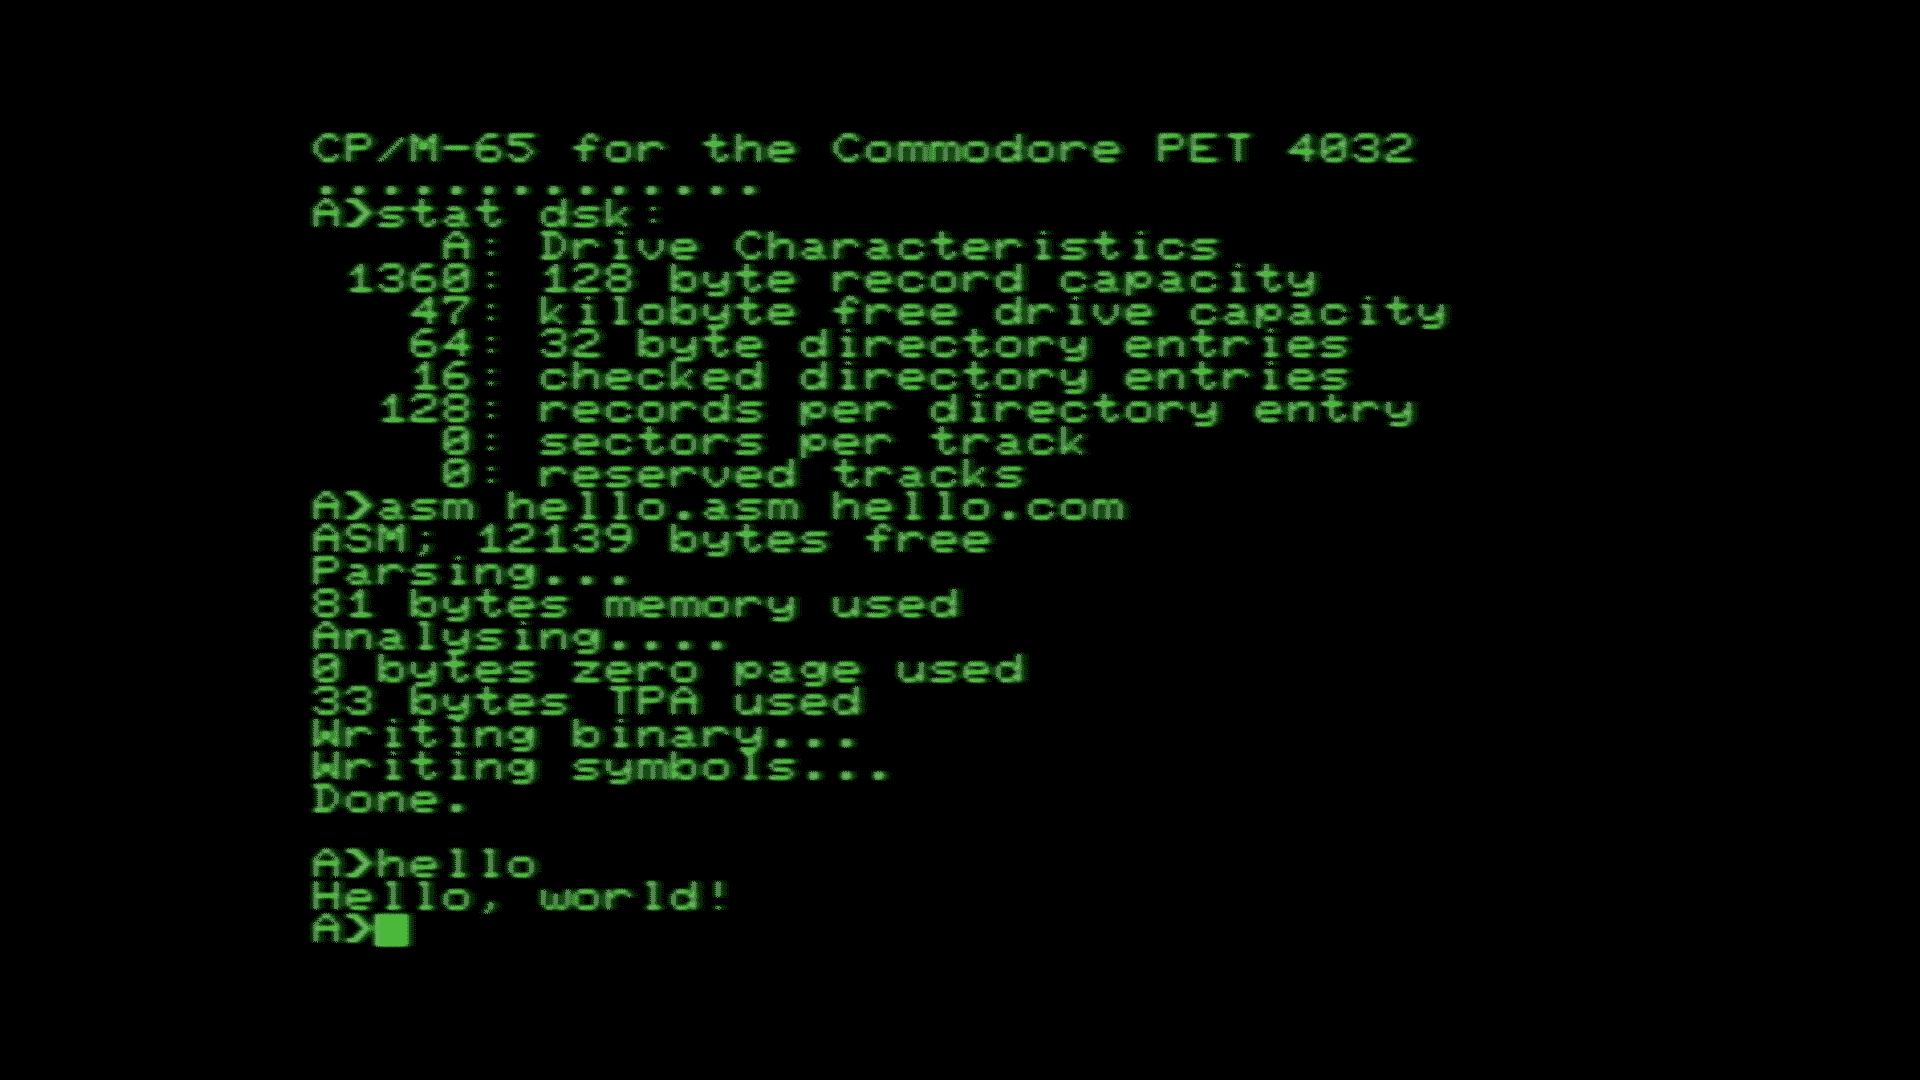 CP/M-65 running on a Commodore PET 4032